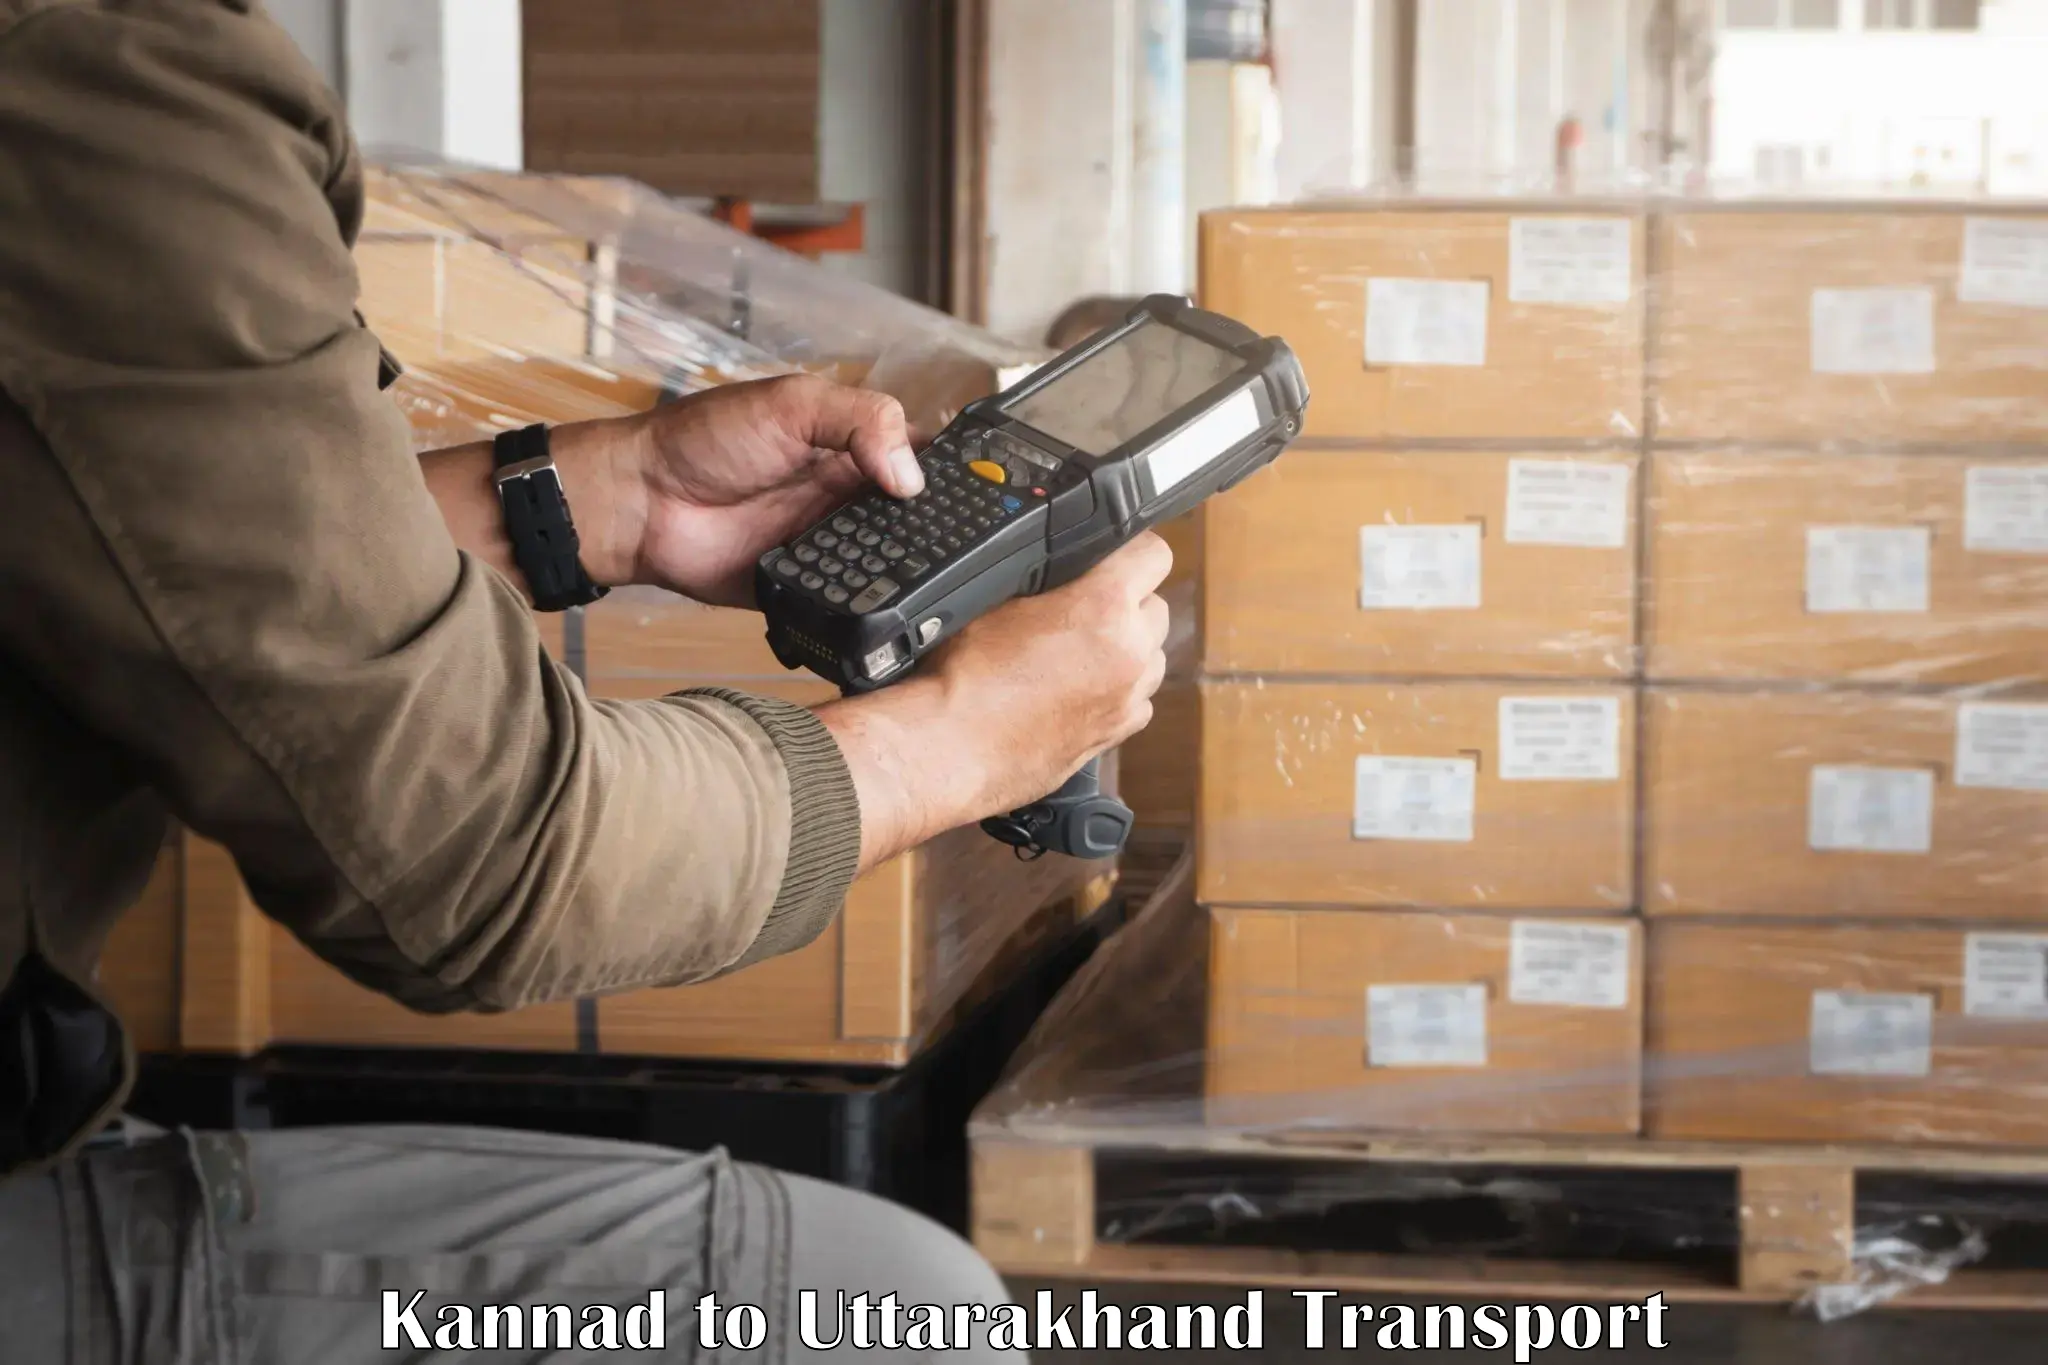 Container transportation services in Kannad to Herbertpur